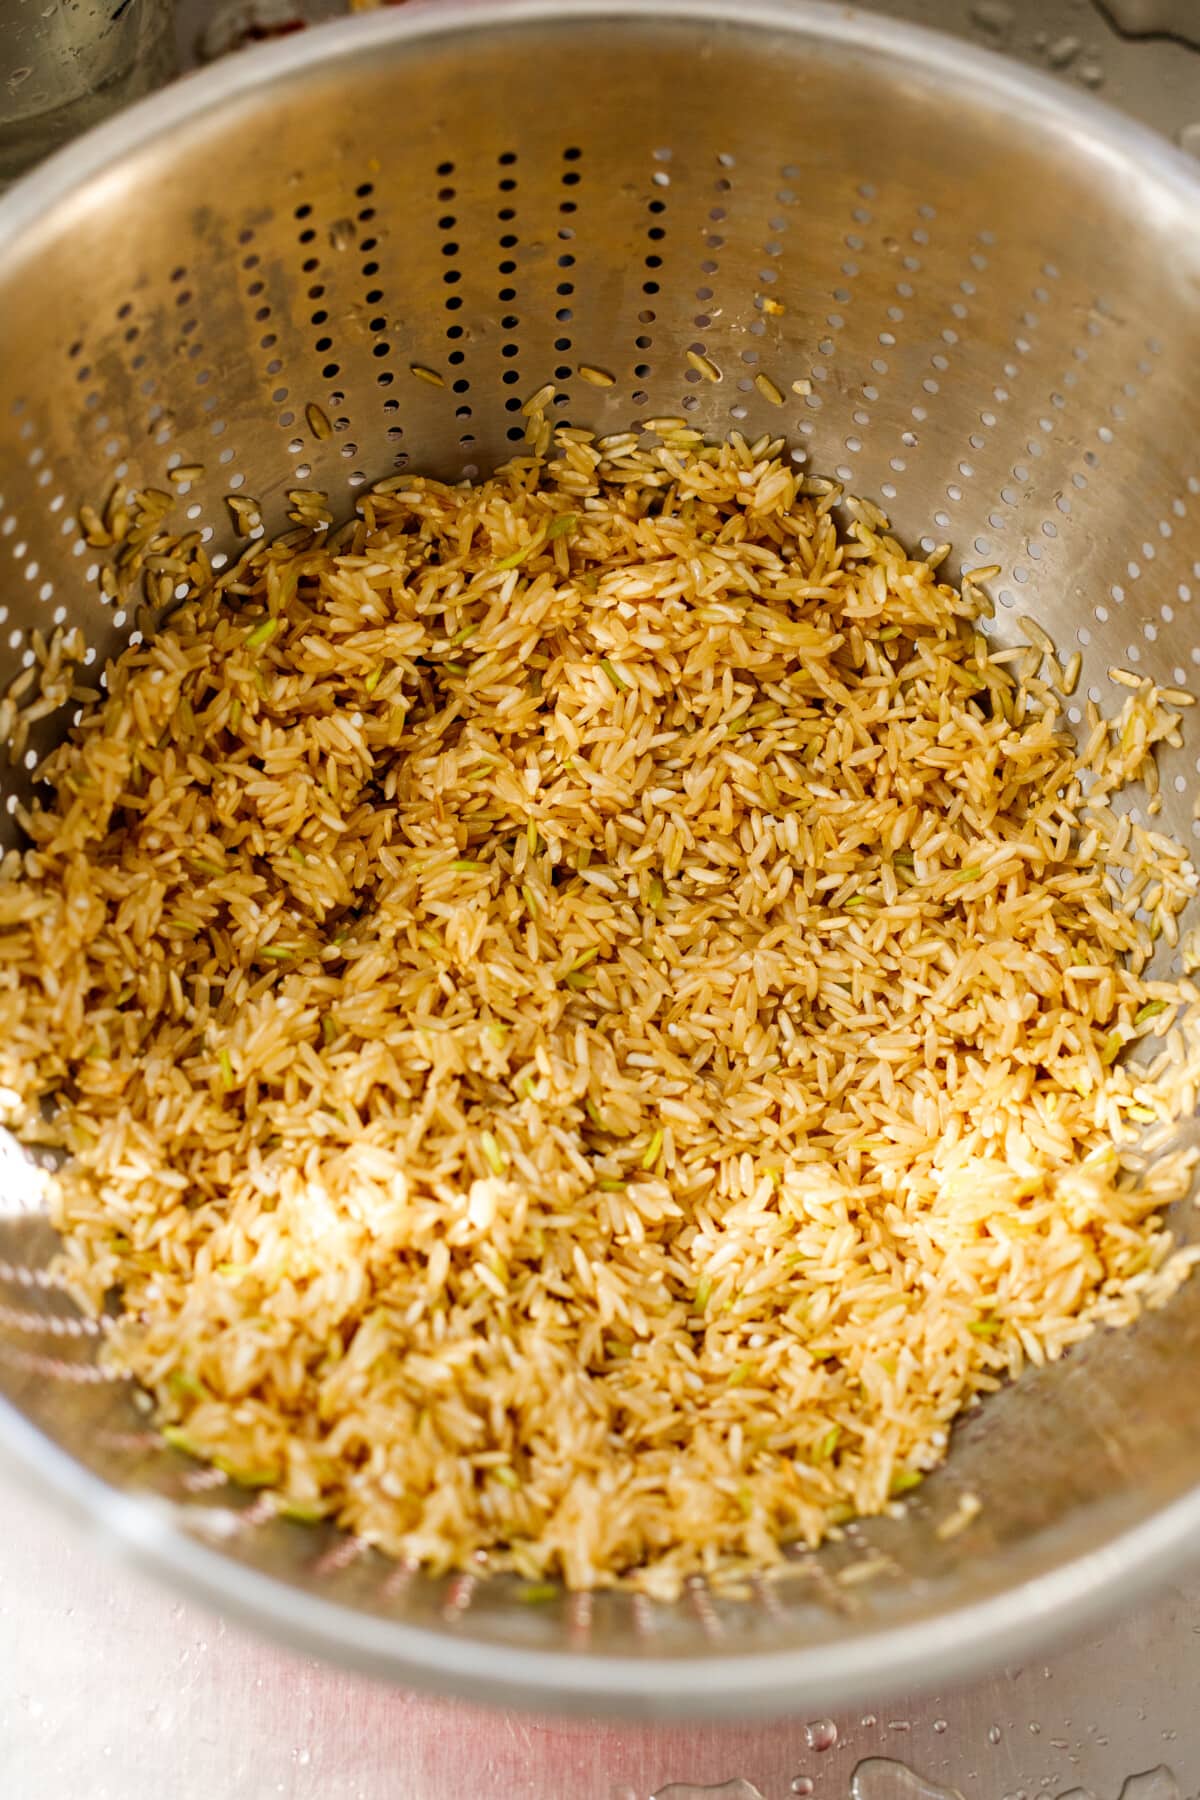 drained basmati rice in colander, ready for cooking.